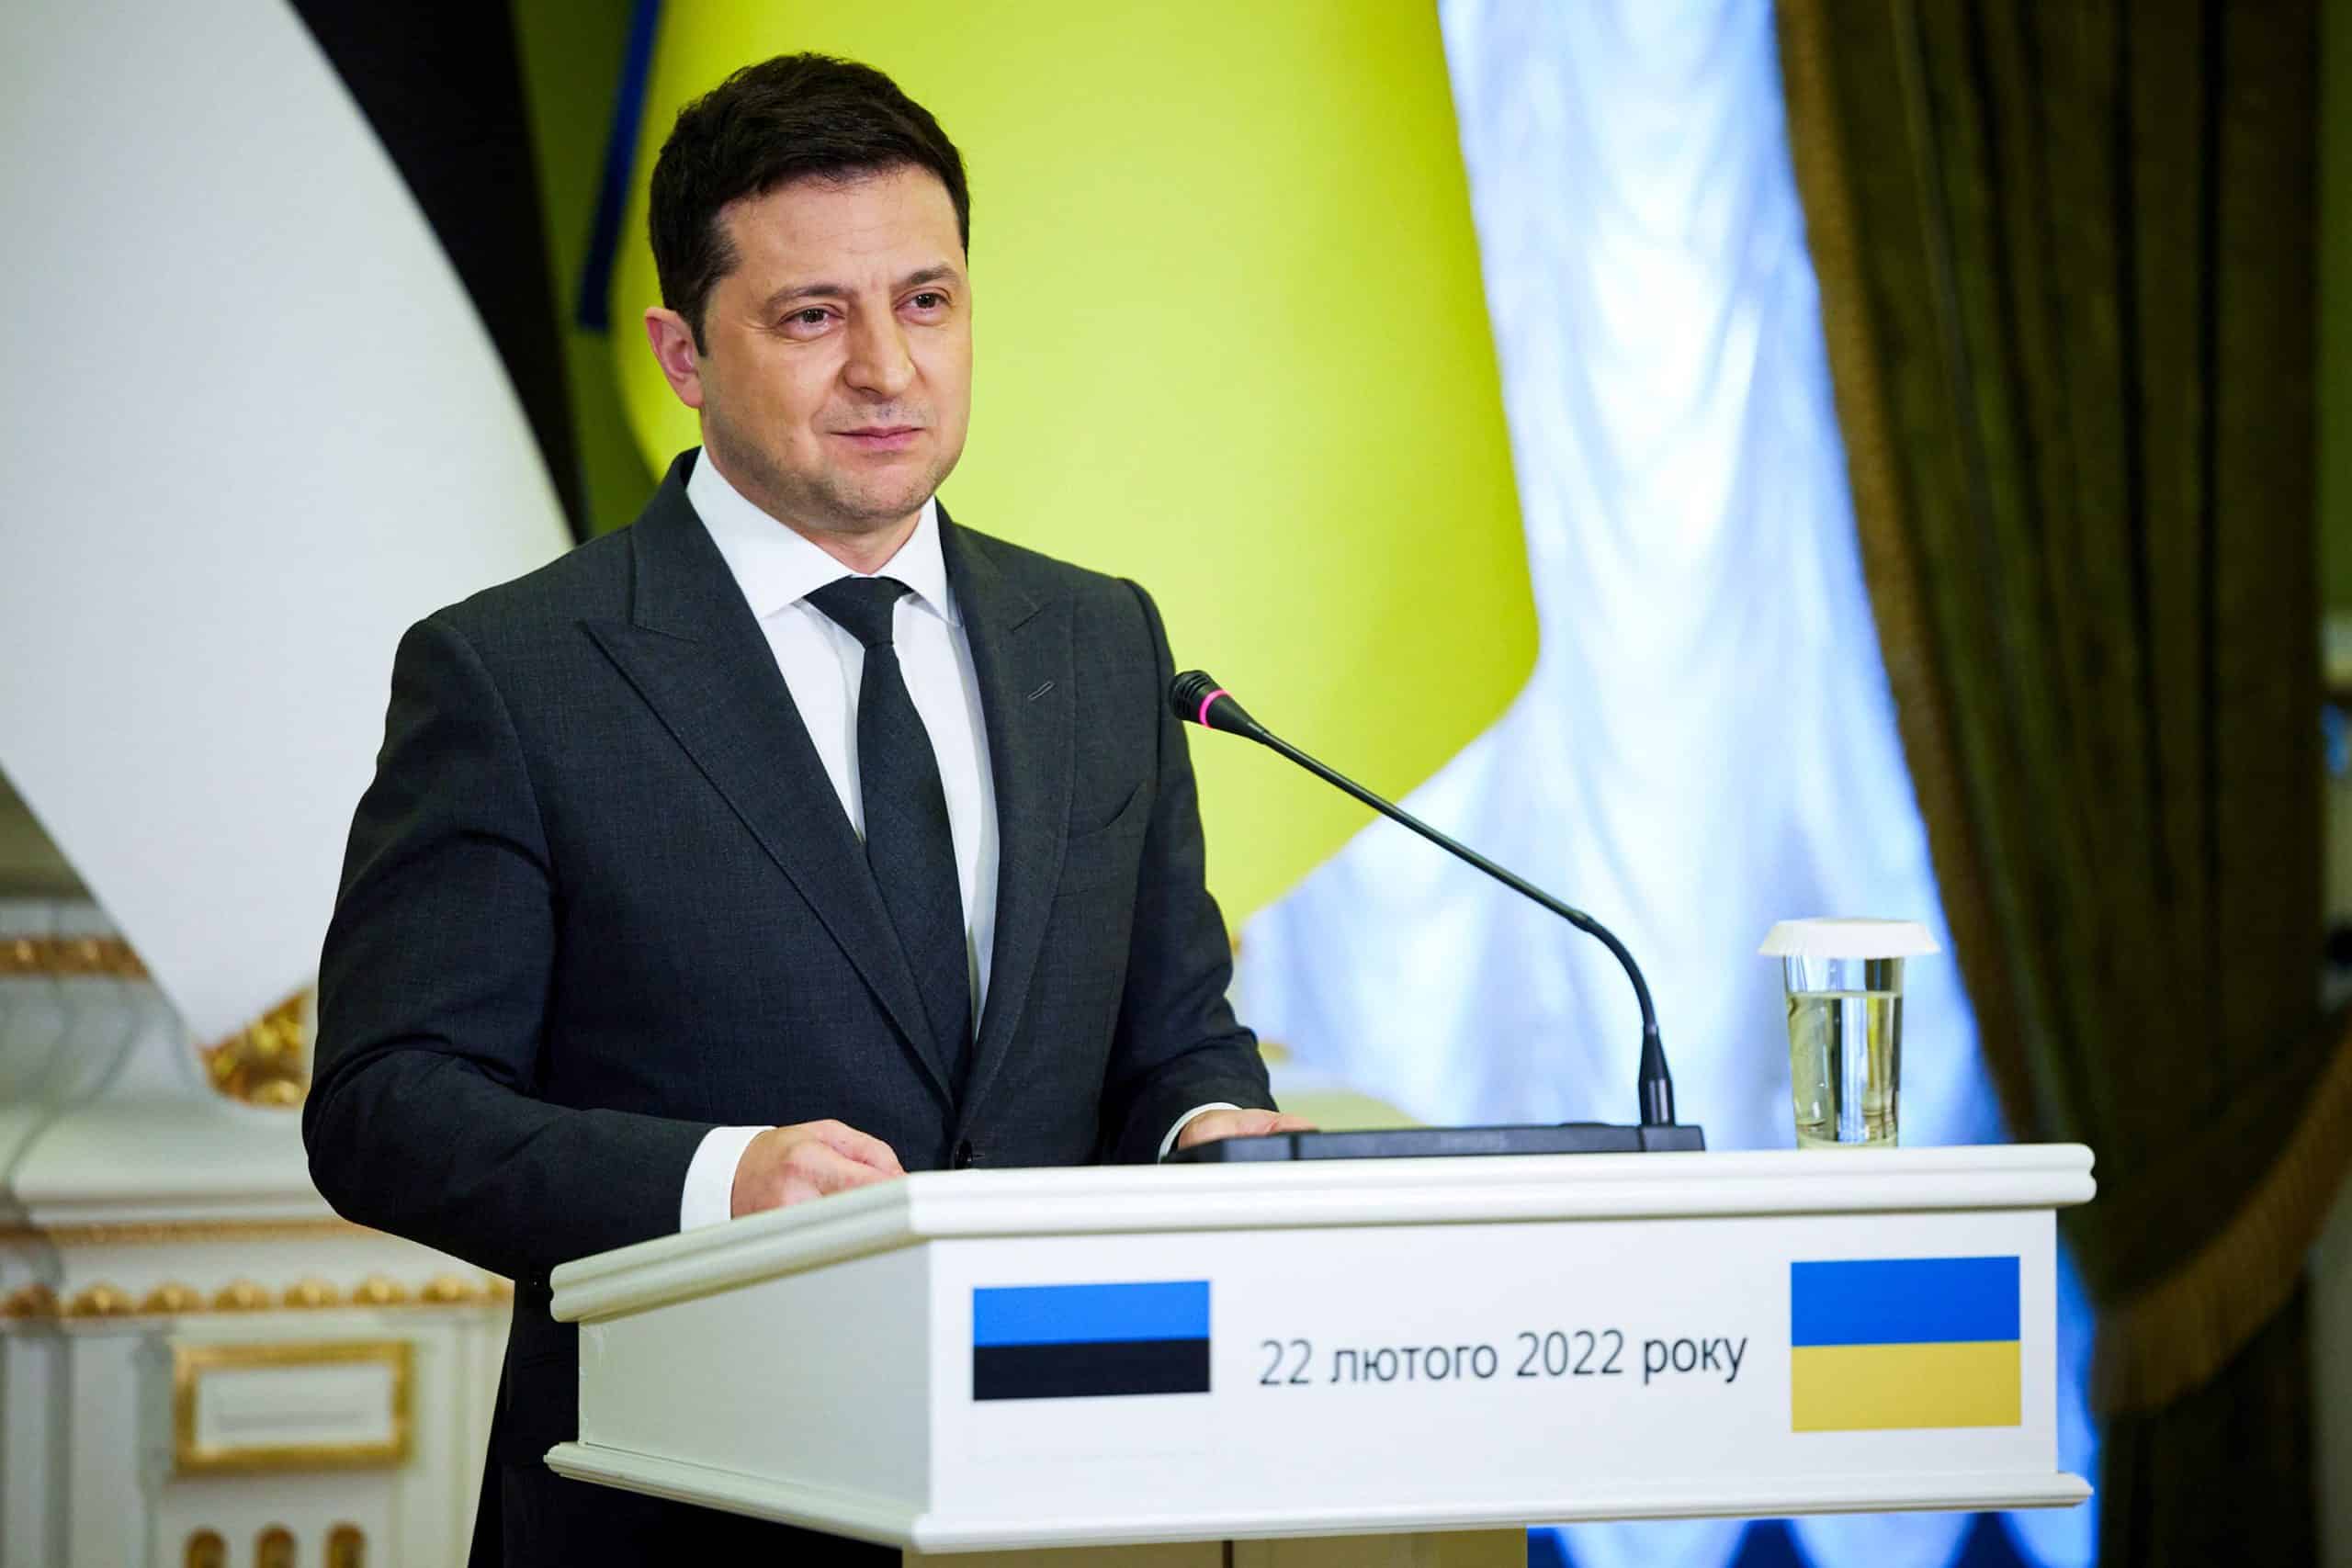 Ukraine and Russia agree to talks, Zelensky announces